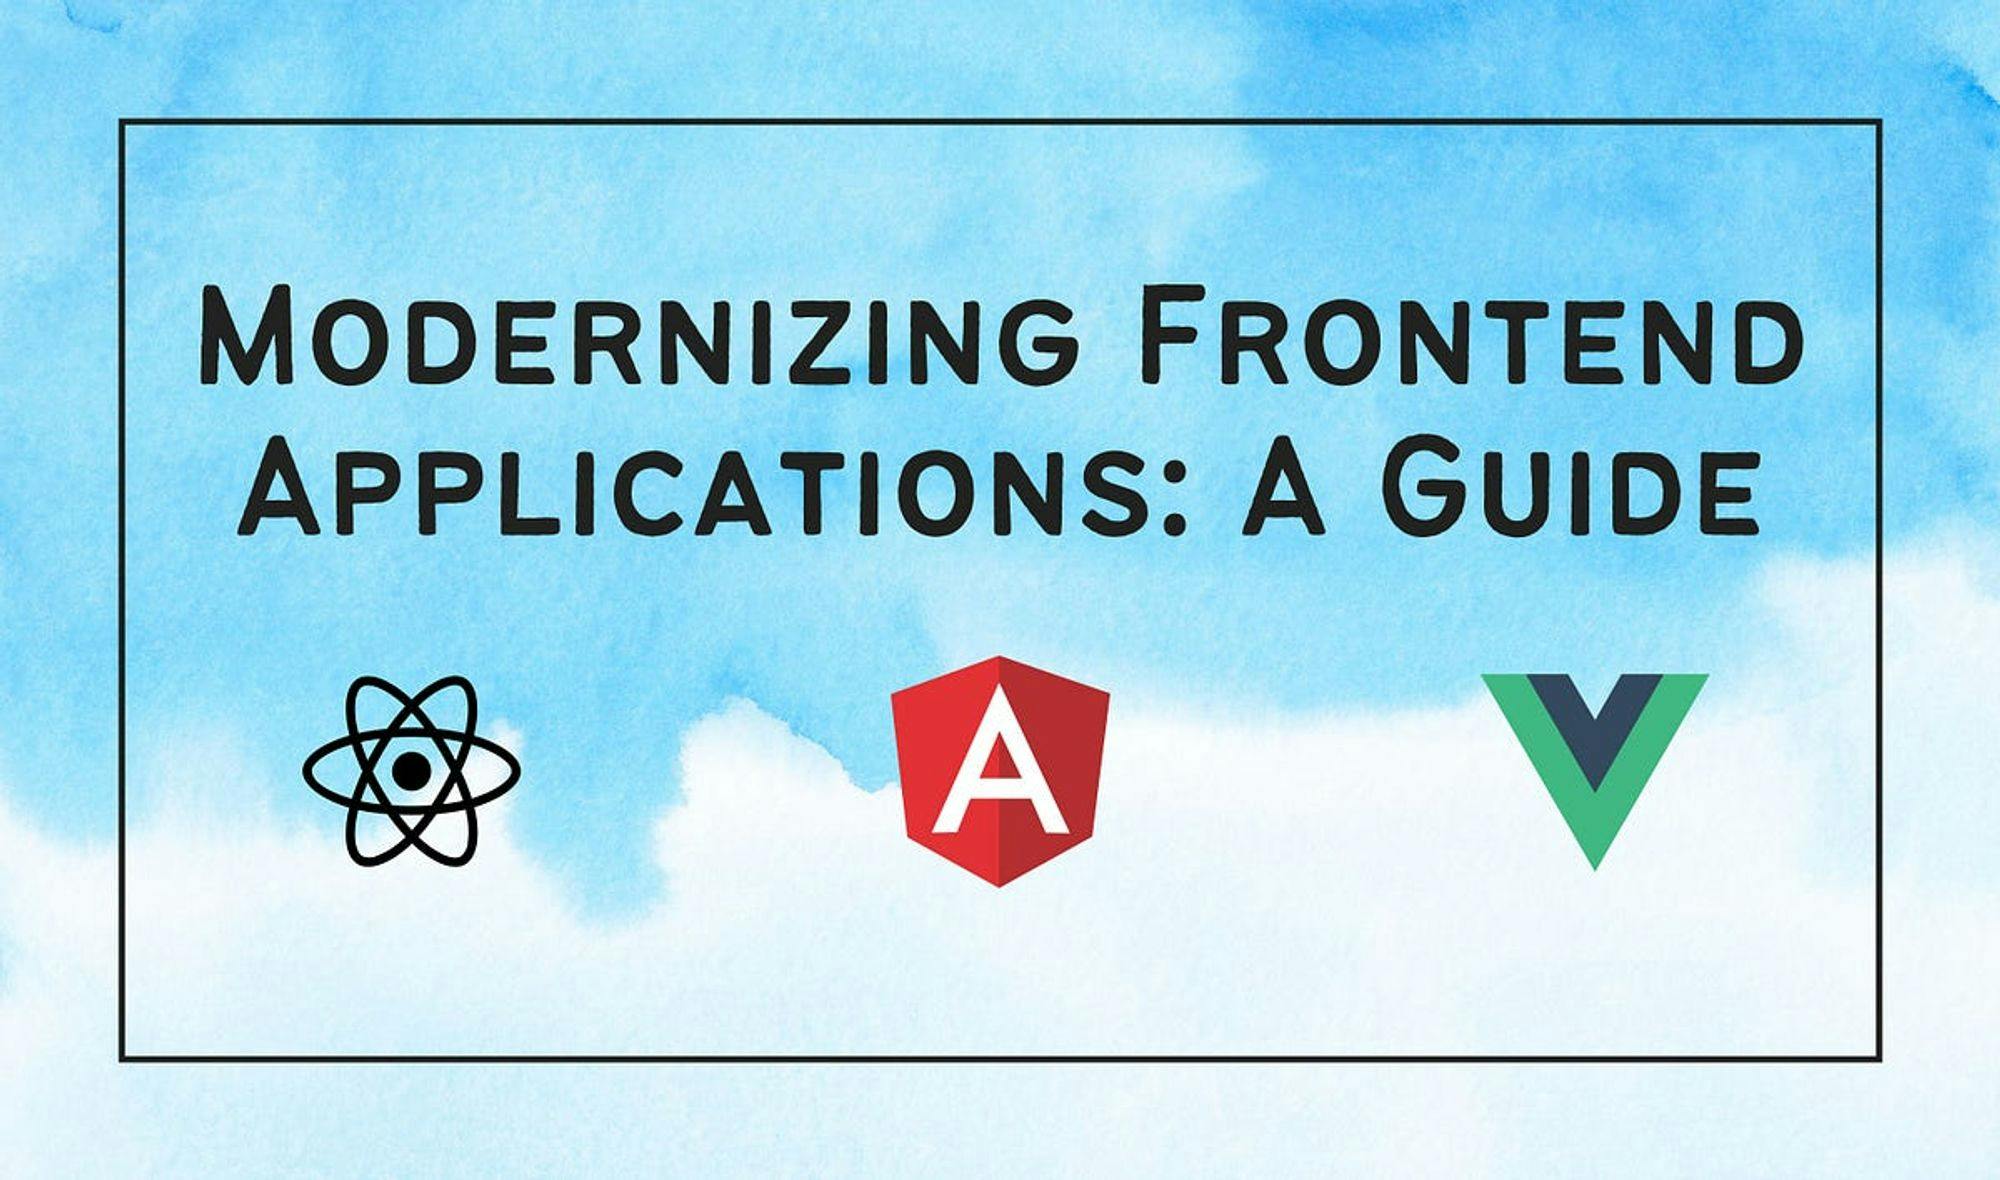 Modernizing Frontend Applications: A Guide